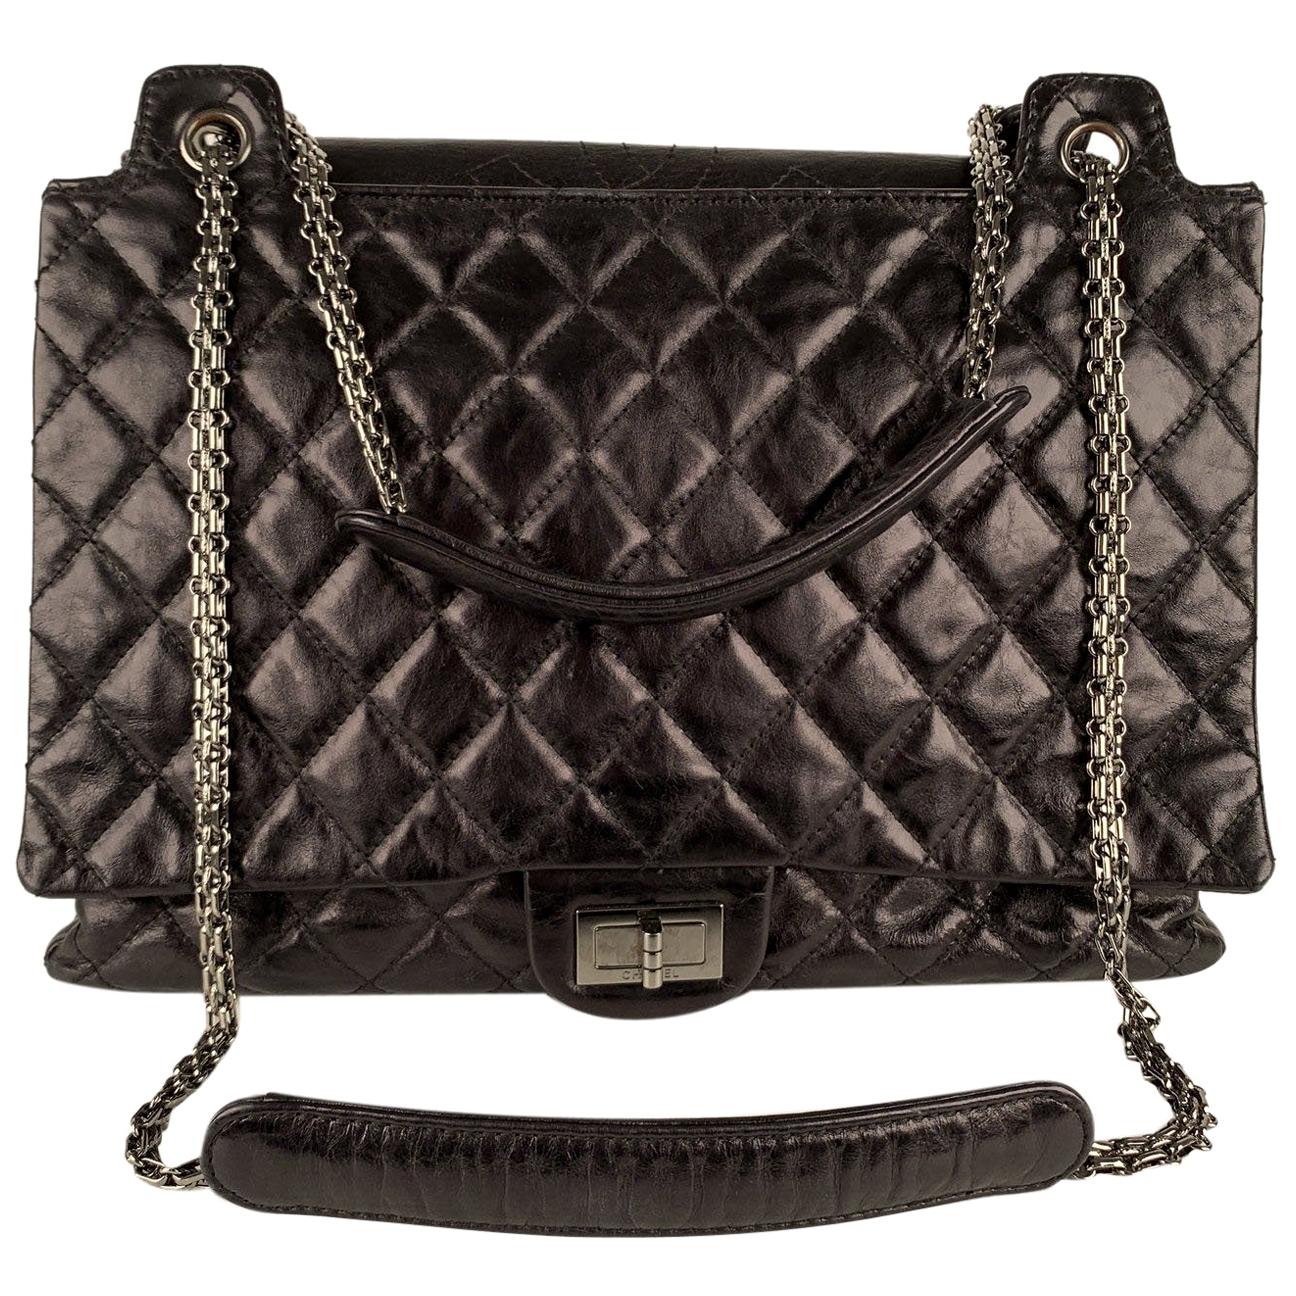 Chanel Black Quilted Leather Large Reissue 2.55 Accordion Flap Bag